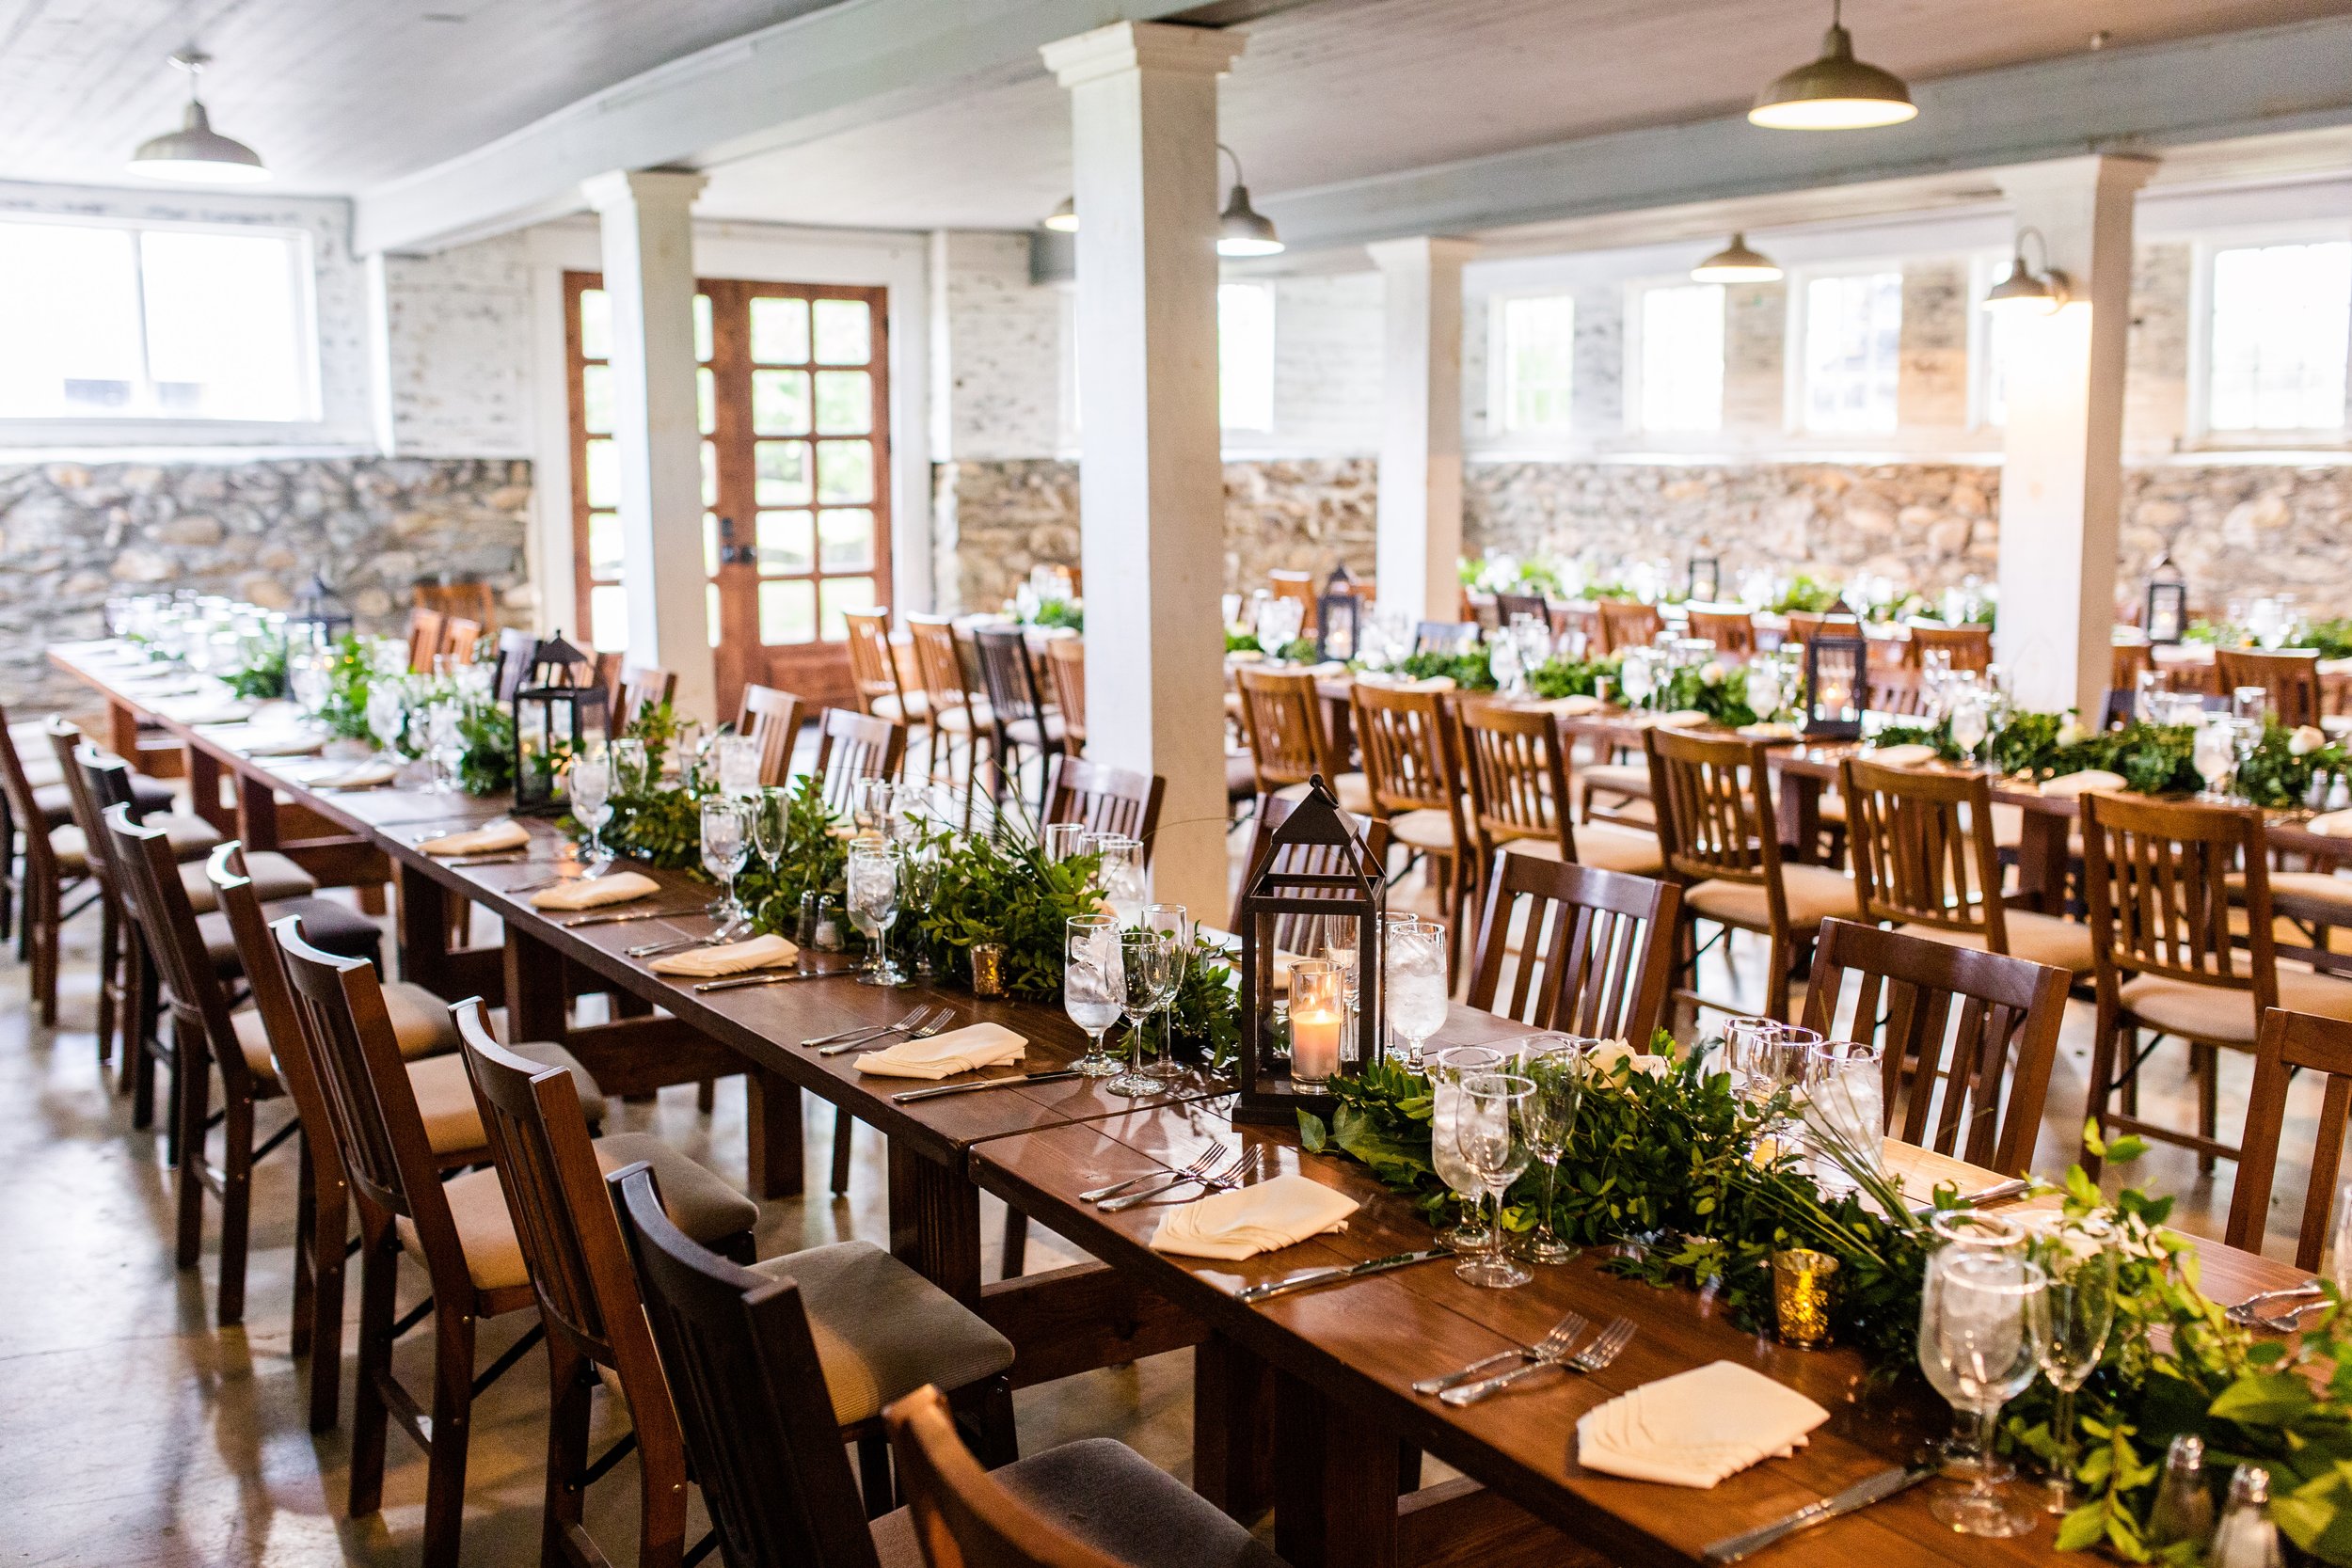 A dinner reception set up in the lower room of the main barn for a wedding at the best vineyard wedding venue in Loudoun County